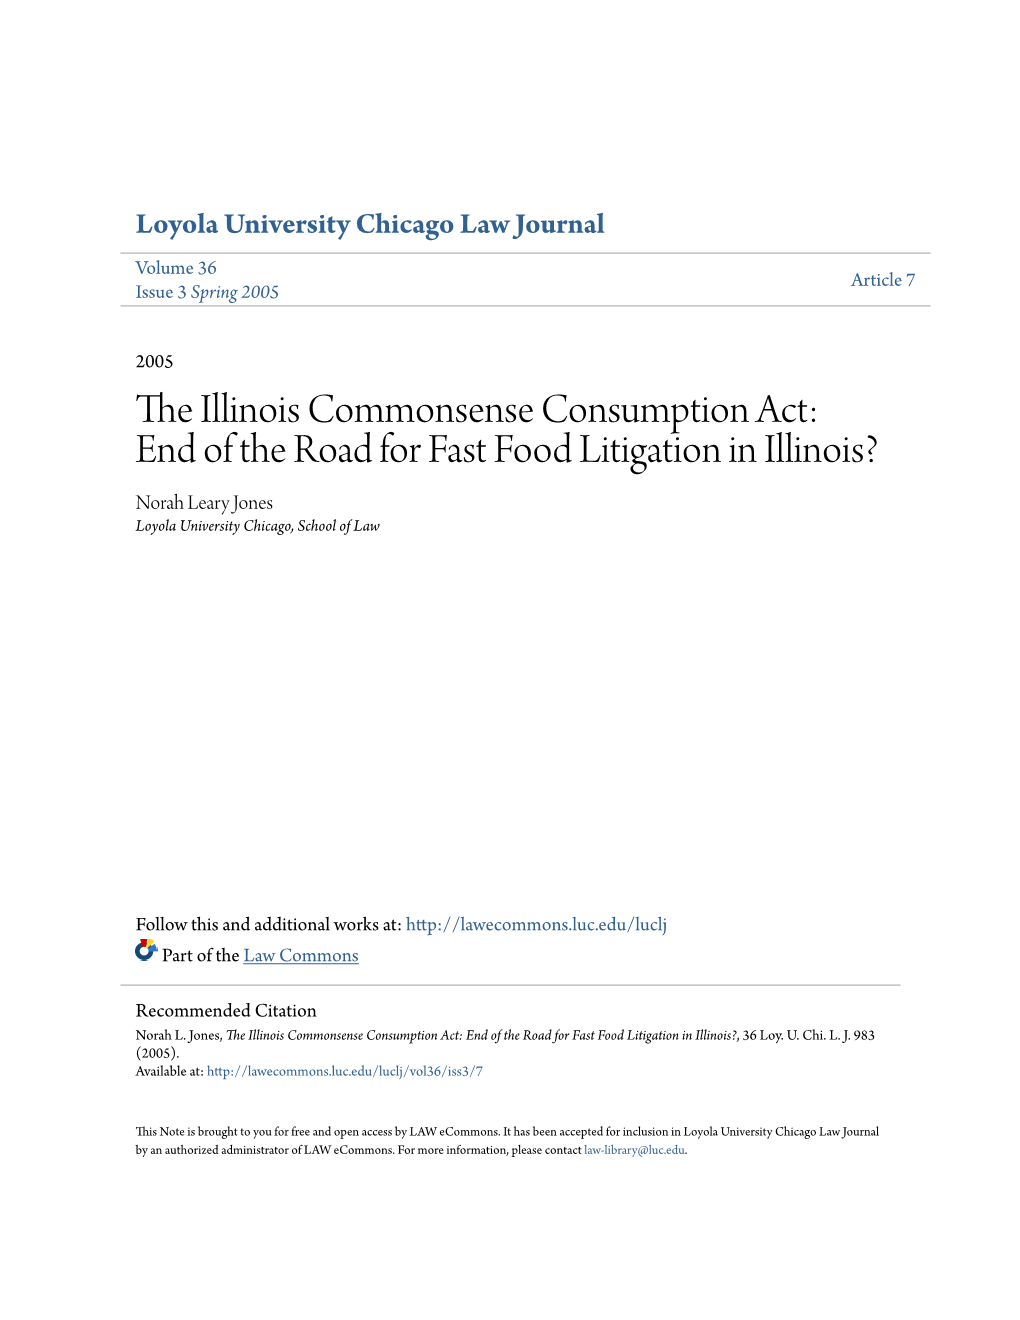 End of the Road for Fast Food Litigation in Illinois? Norah Leary Jones Loyola University Chicago, School of Law